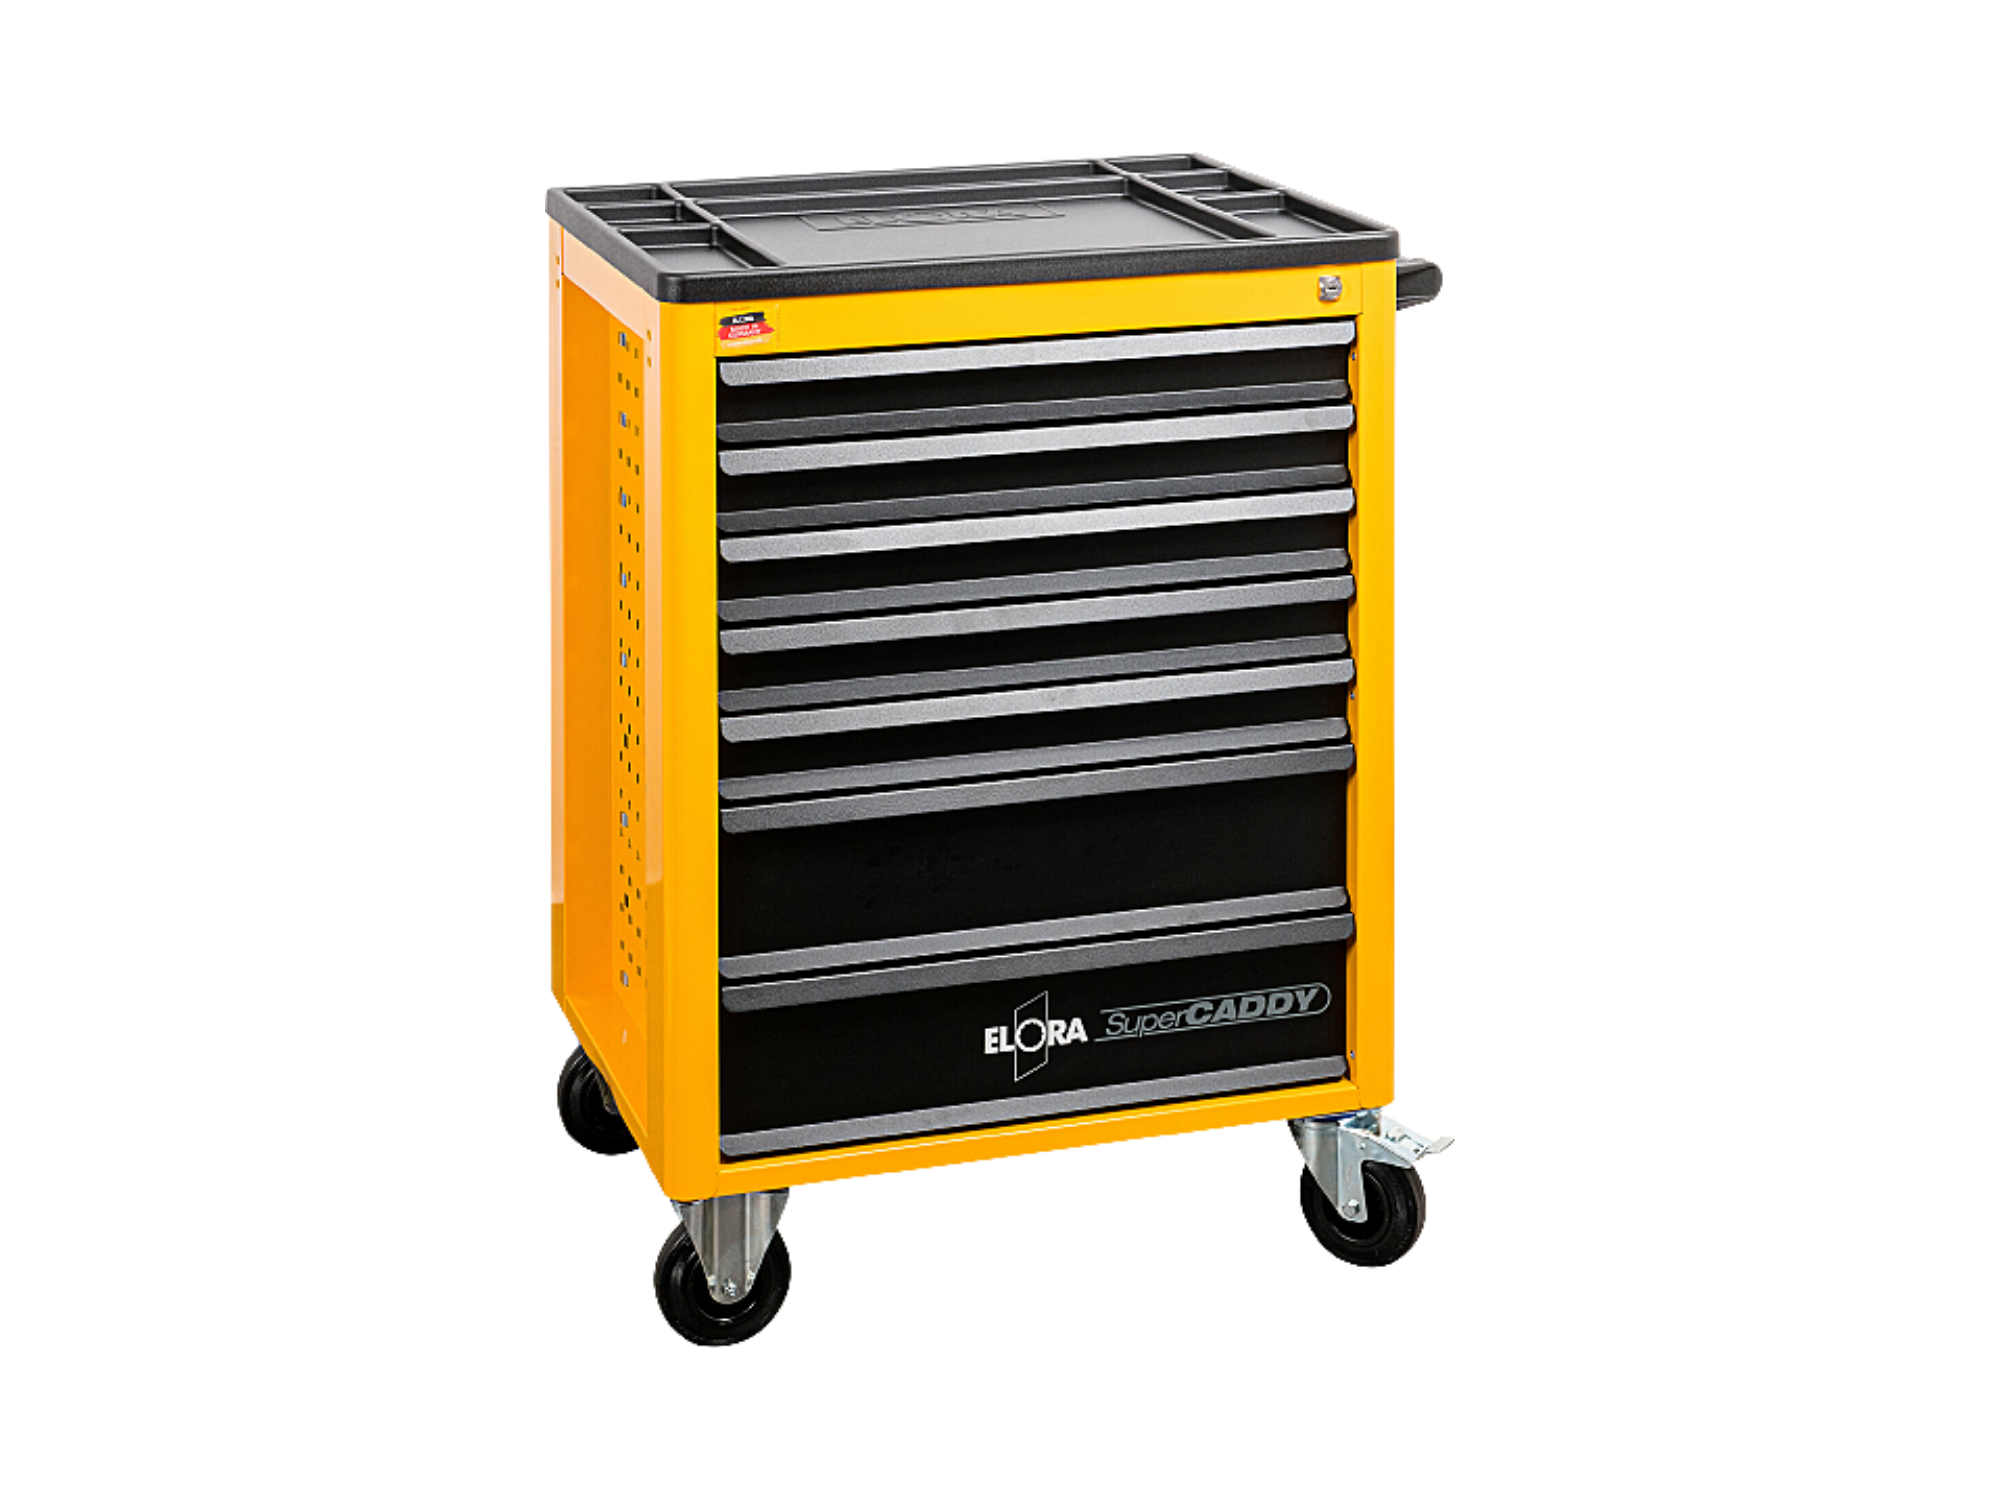 ELORA 1220-L7 Roller Tool Cabinet Super Caddy (ELORA Tools) - Premium Roller Tool Cabinet from ELORA - Shop now at Yew Aik.